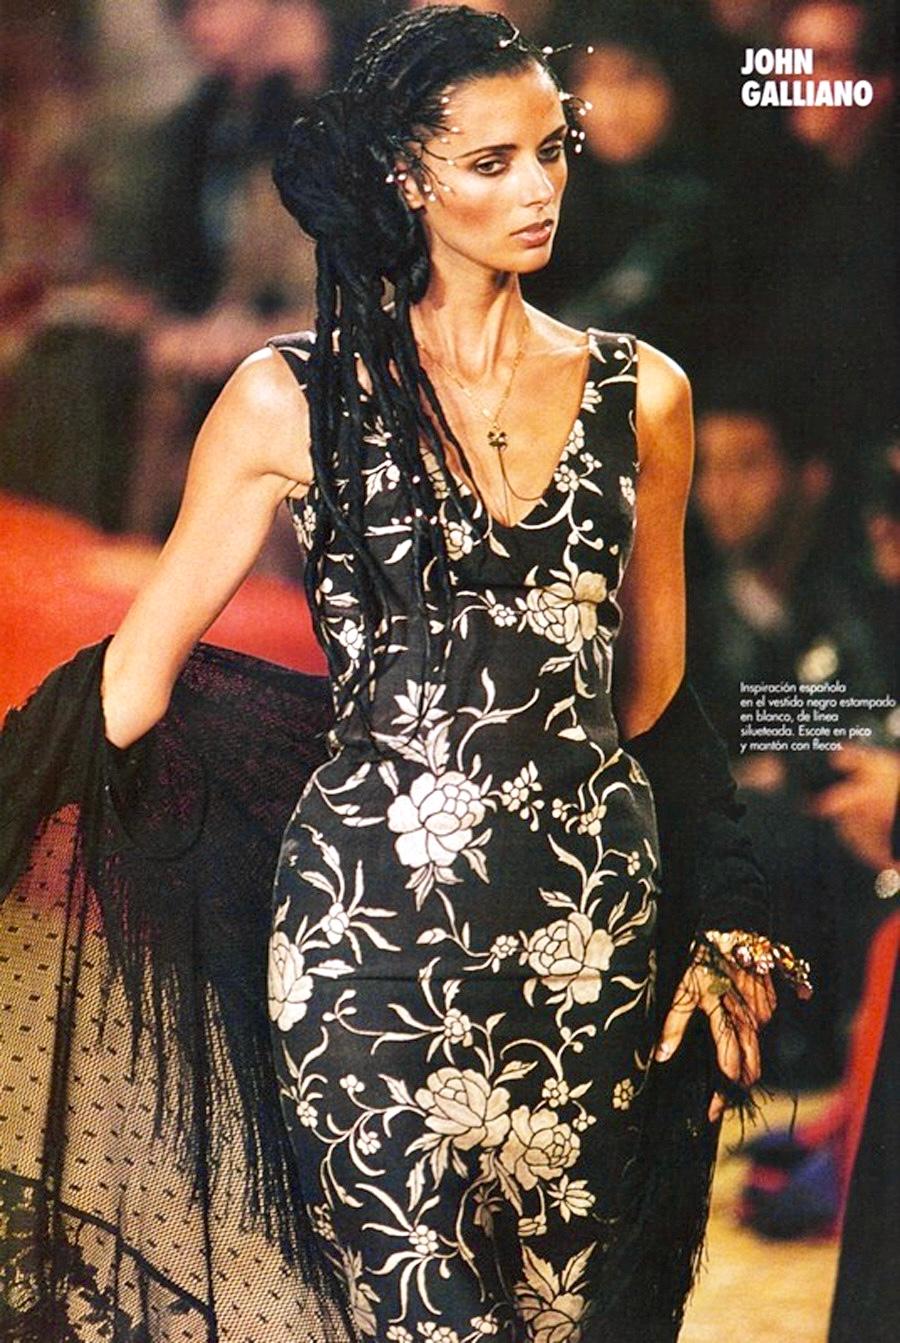 Presenting a stunning black lace John Galliano flamenco style shawl. From the Spring/Summer 1997 collection, this incredible shawl jacket debuted on the season's runway. Constructed entirely of intricate lace, this shawl features long sleeves, a